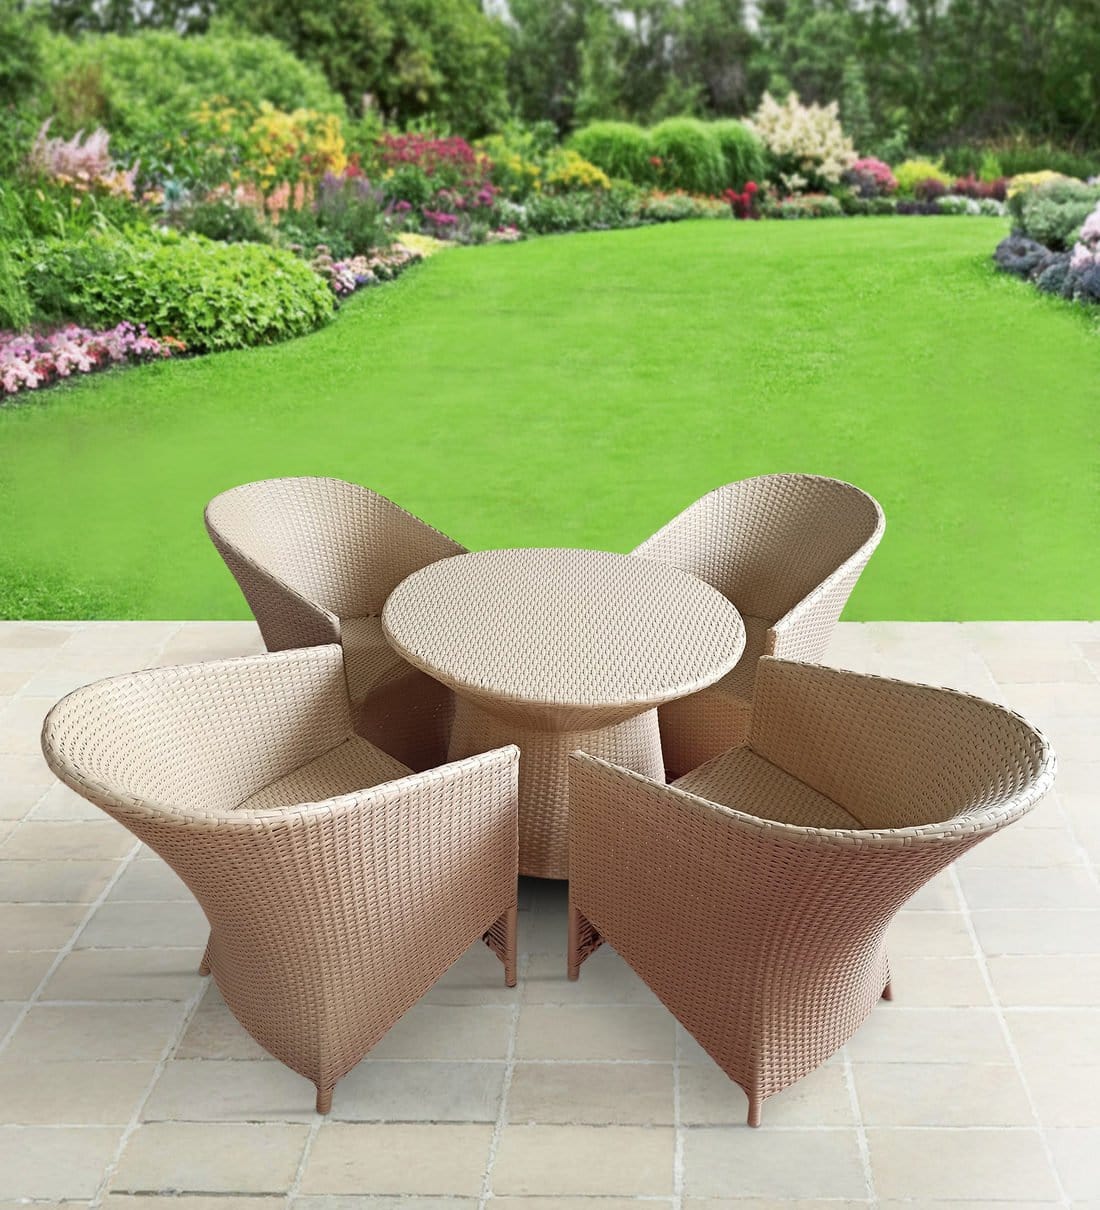 Dreamline Outdoor Garden/Balcony Patio Seating Set 1+4, 4 Chairs And Table Set (Cream)